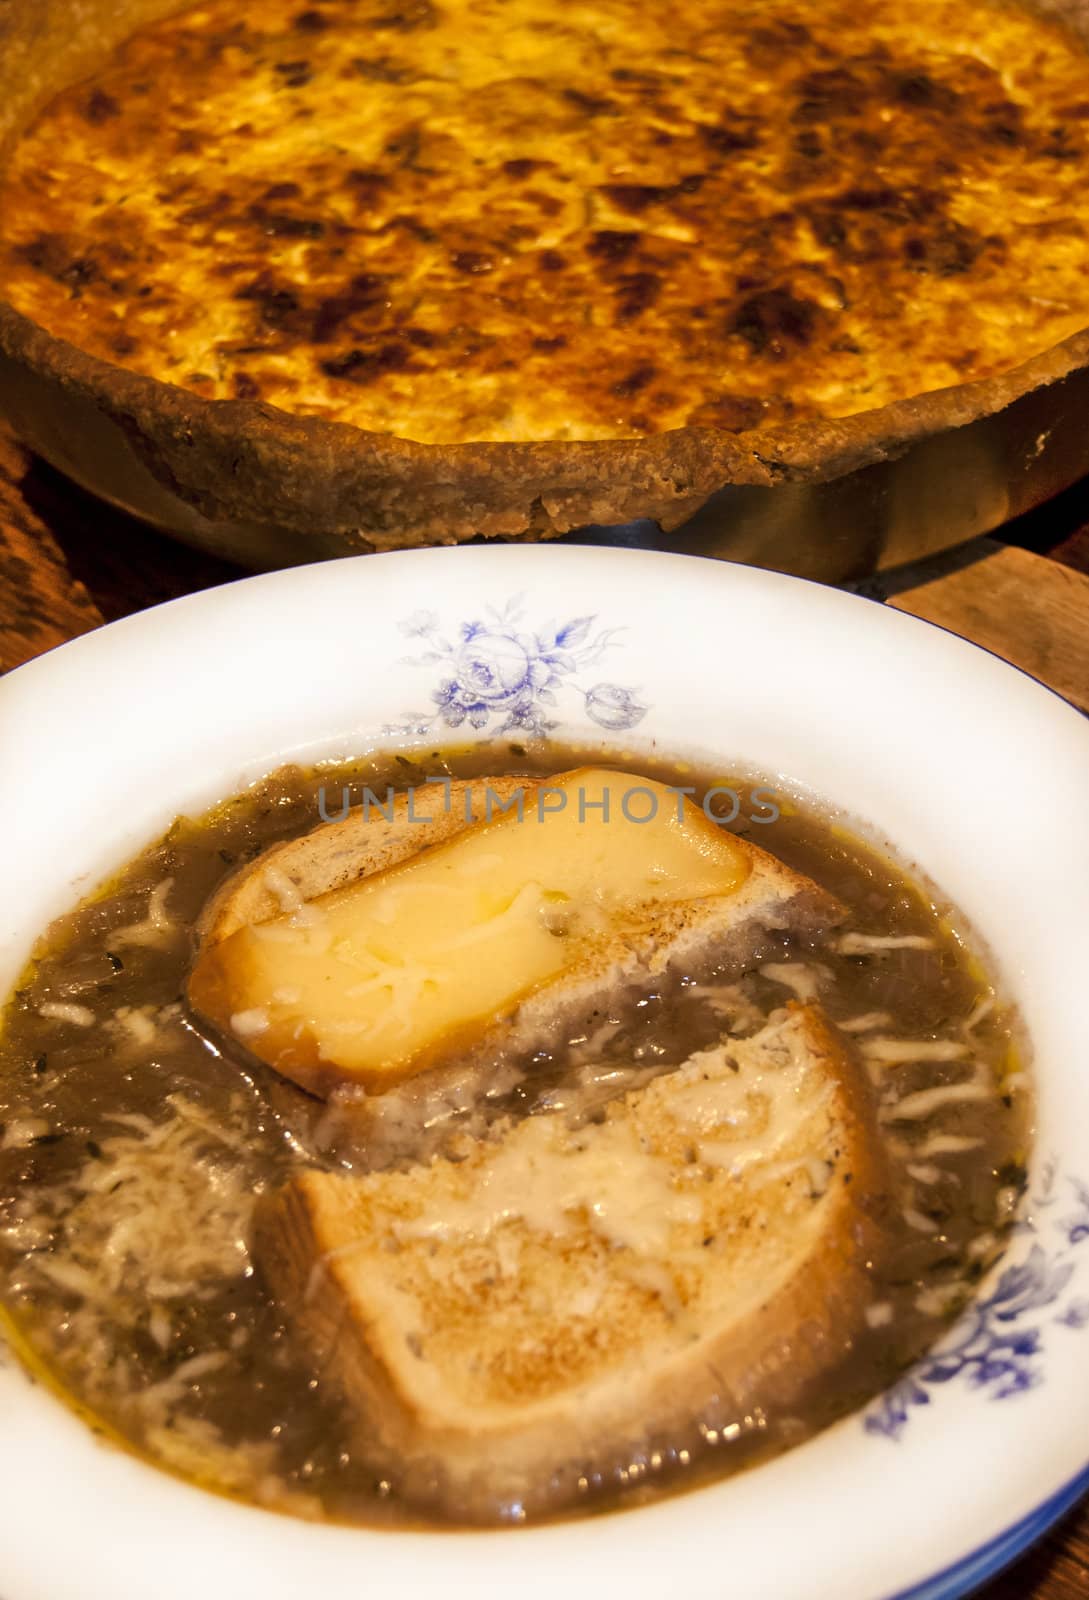 Onion soup and quiche pie by varbenov